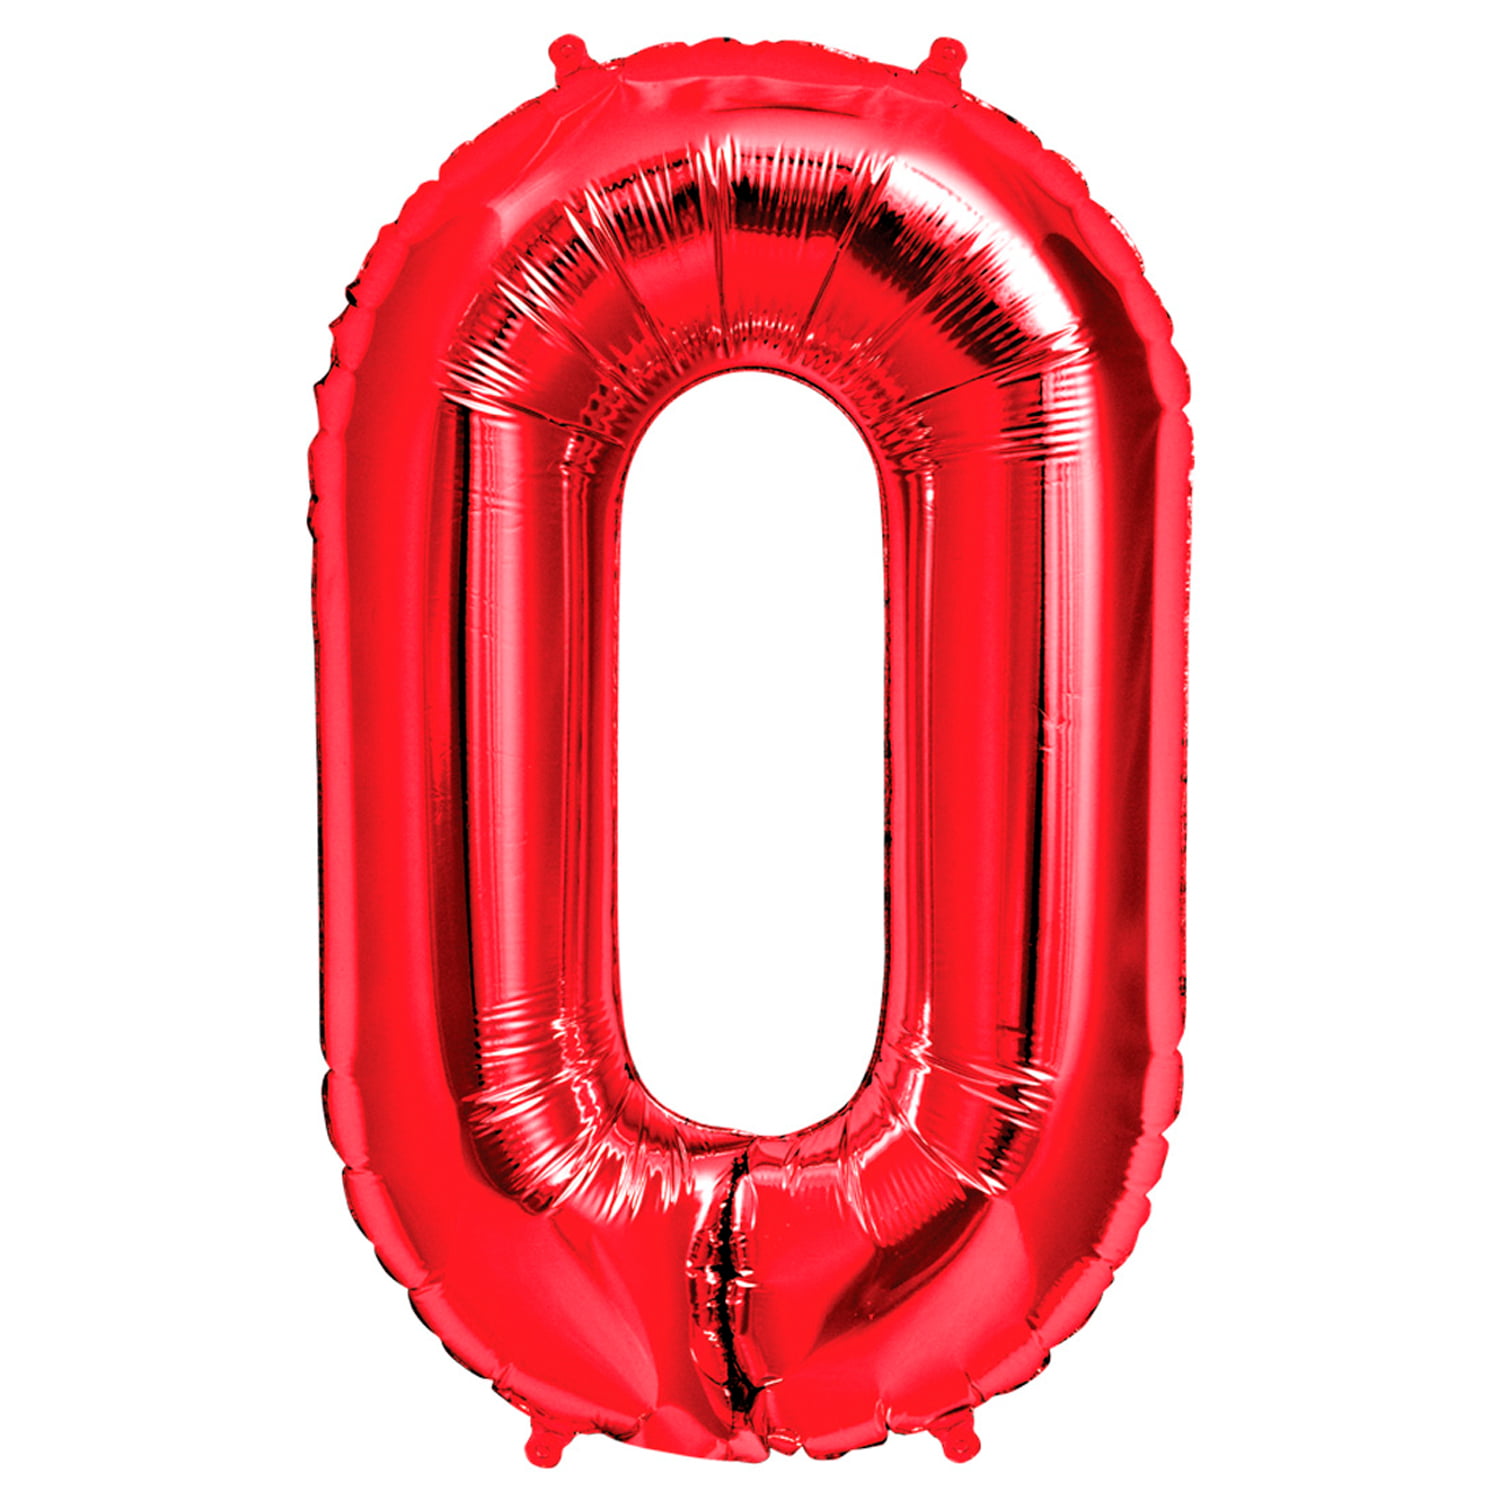 Number 5 Red Giant 34 Inch Supershape Foil Balloon 